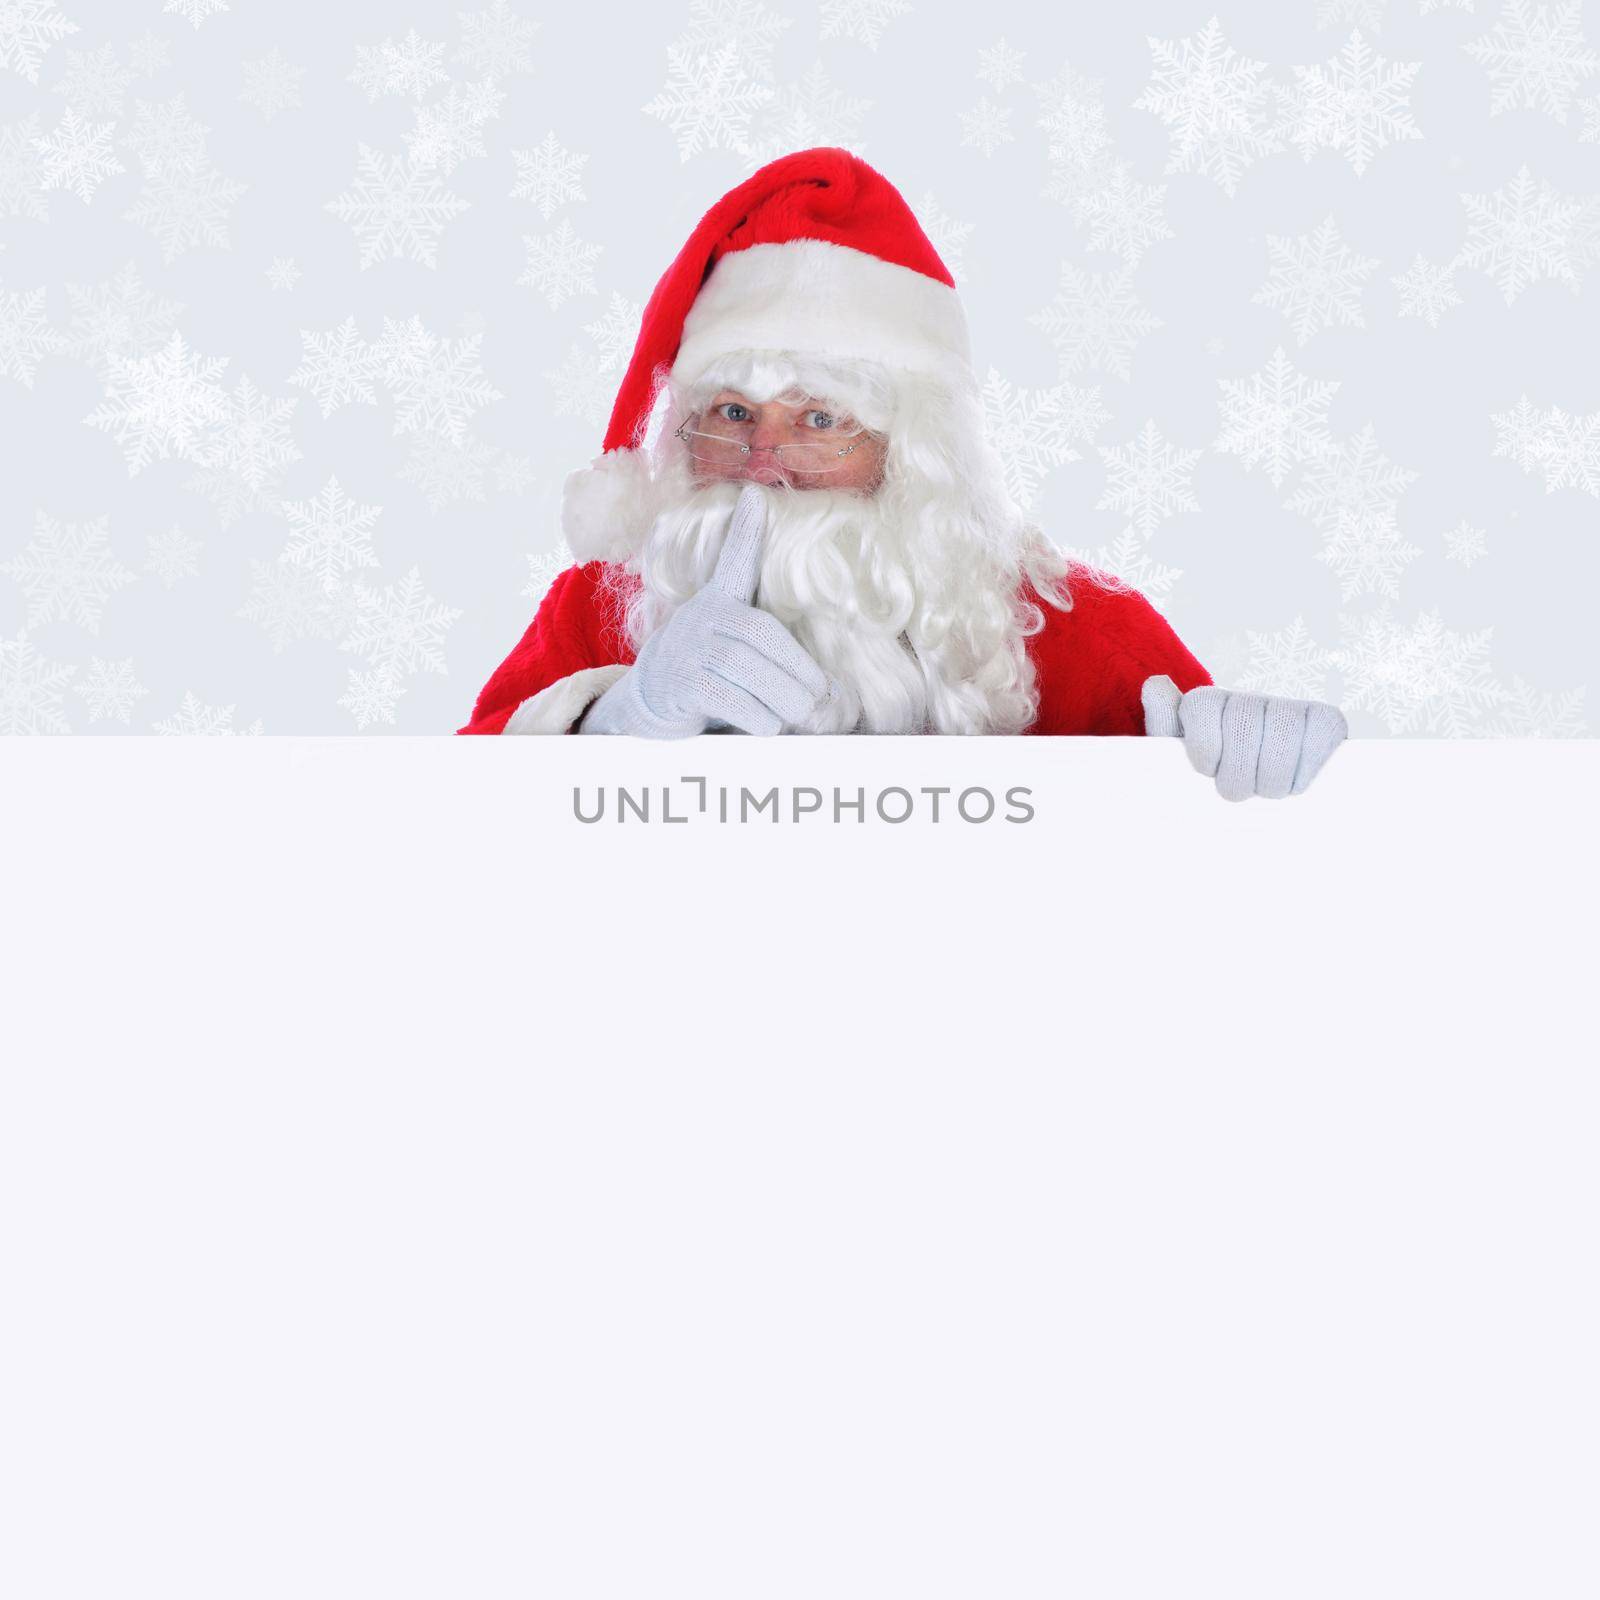 Santa Claus with blank sign making shhh sign  with a light silver background with snow flakes by sCukrov